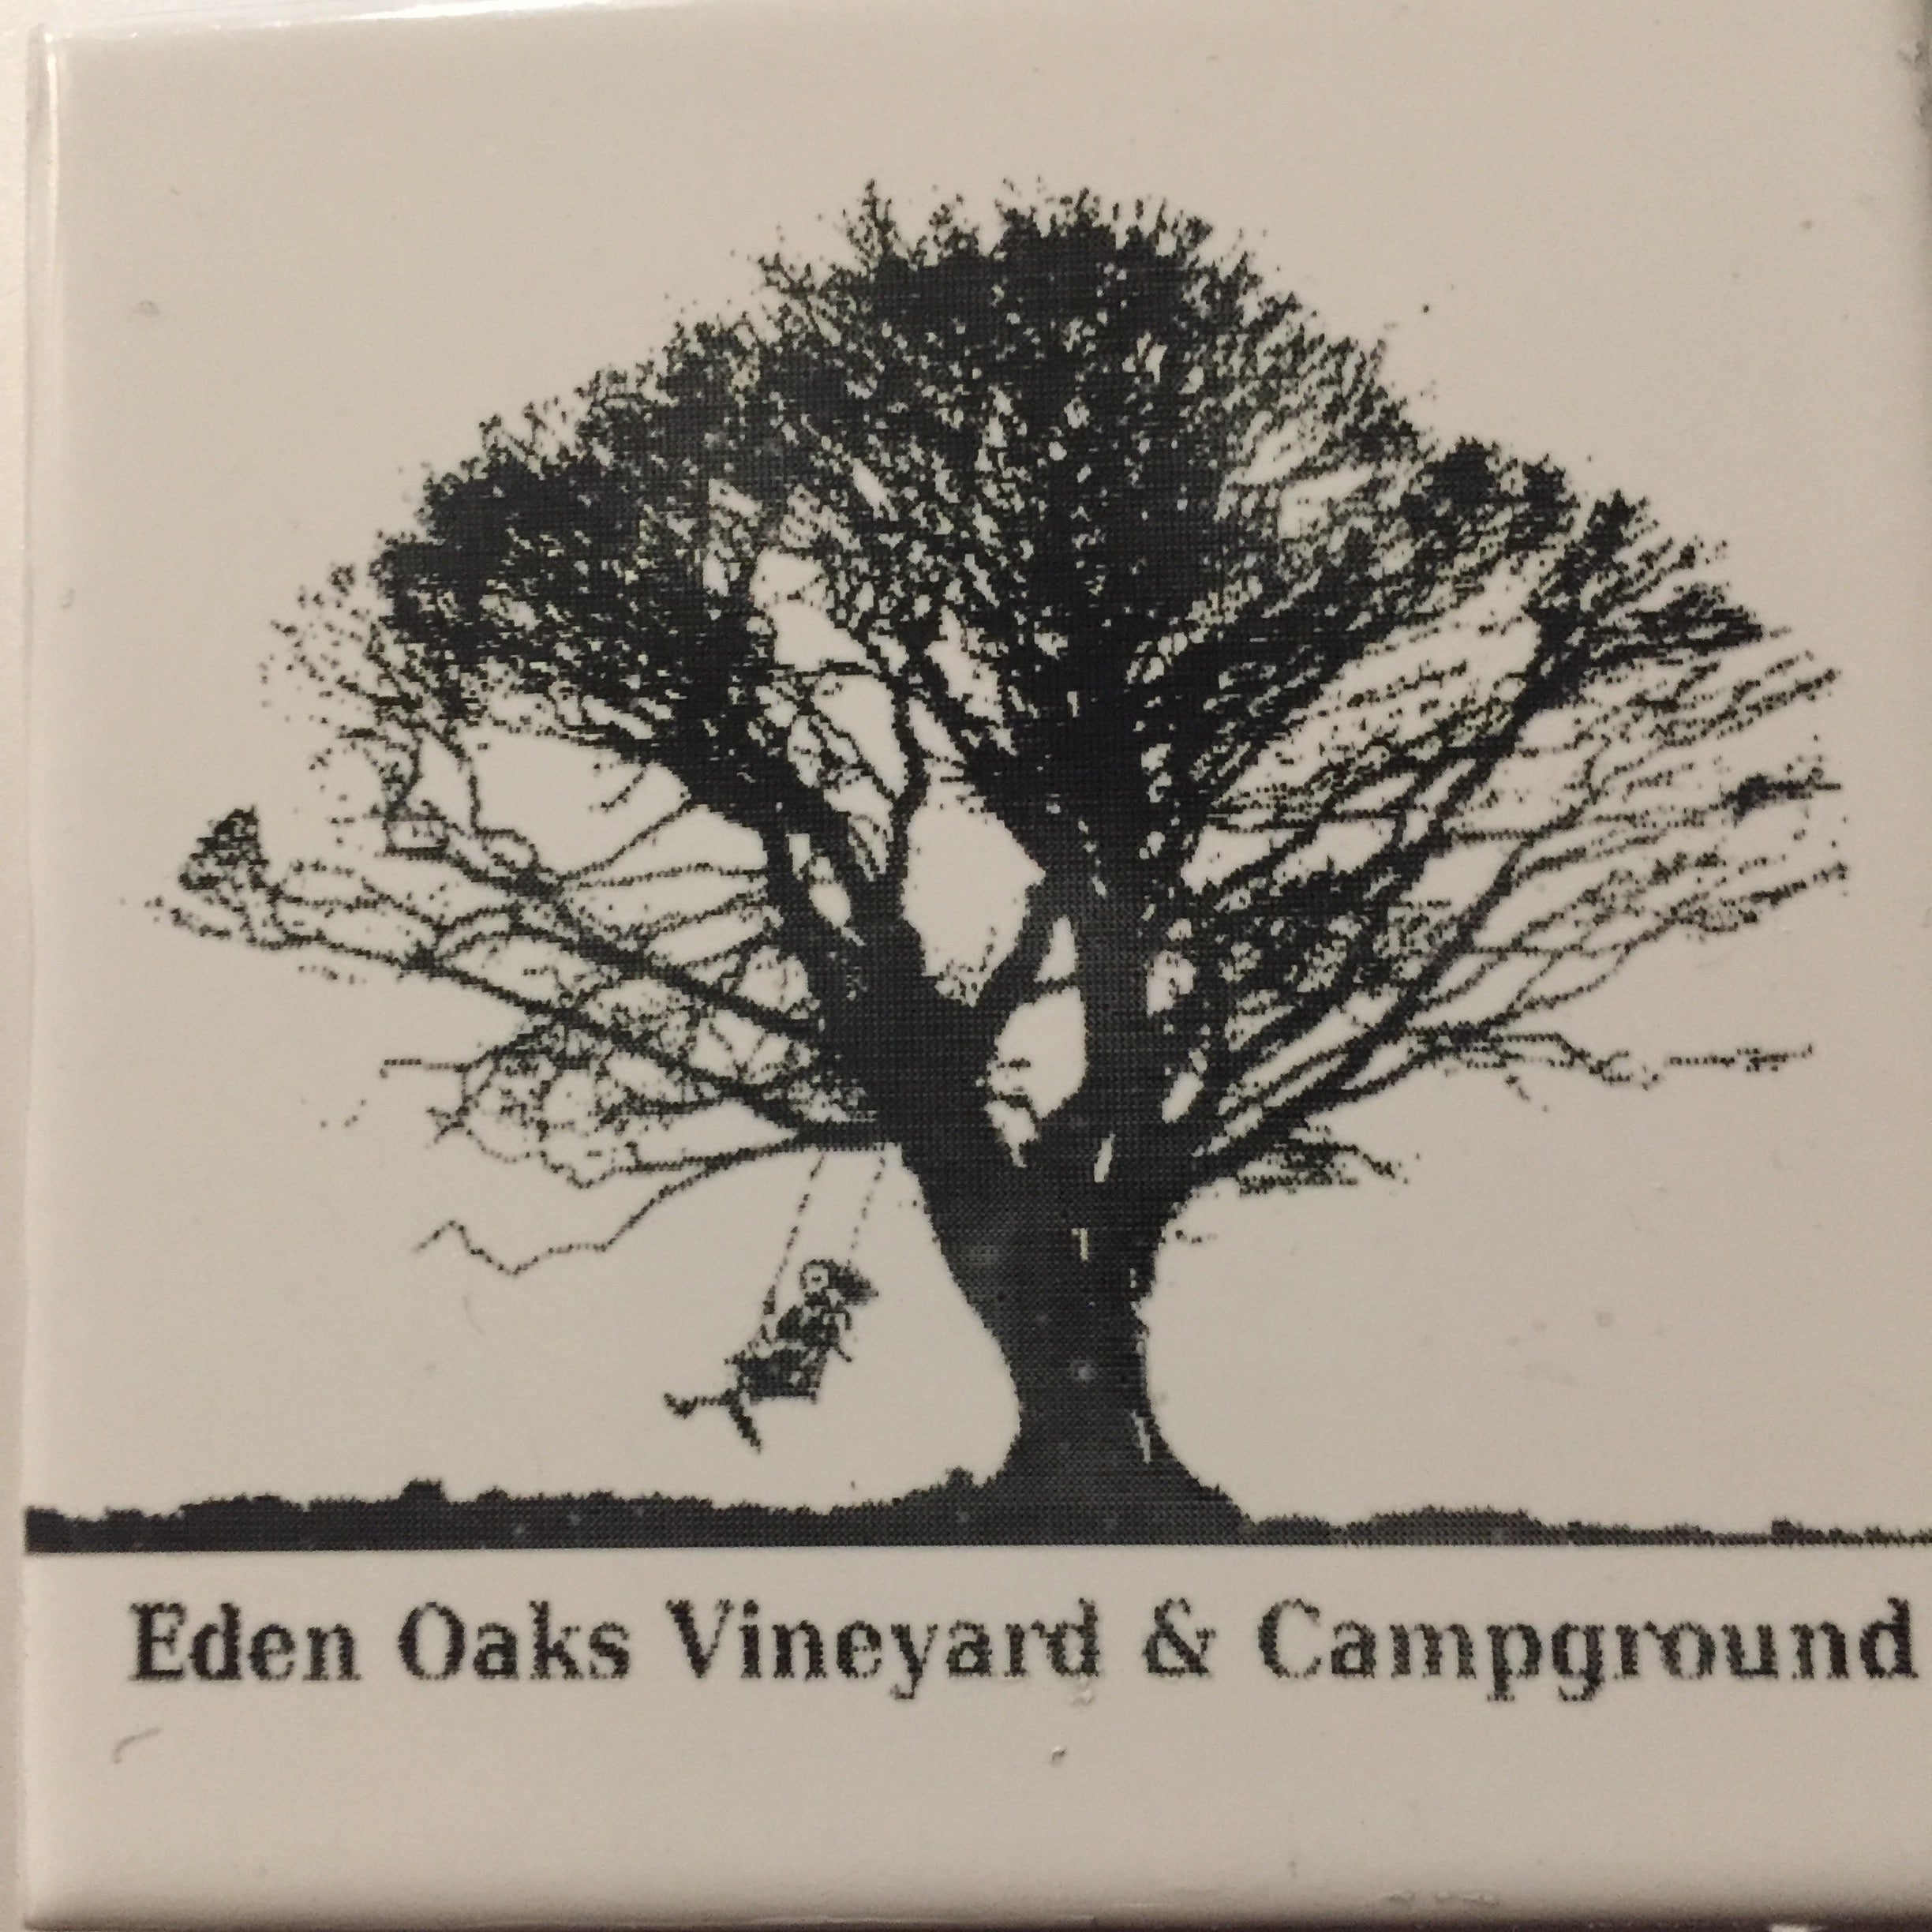 Camper submitted image from Eden Oaks Vineyard and Campground - 1